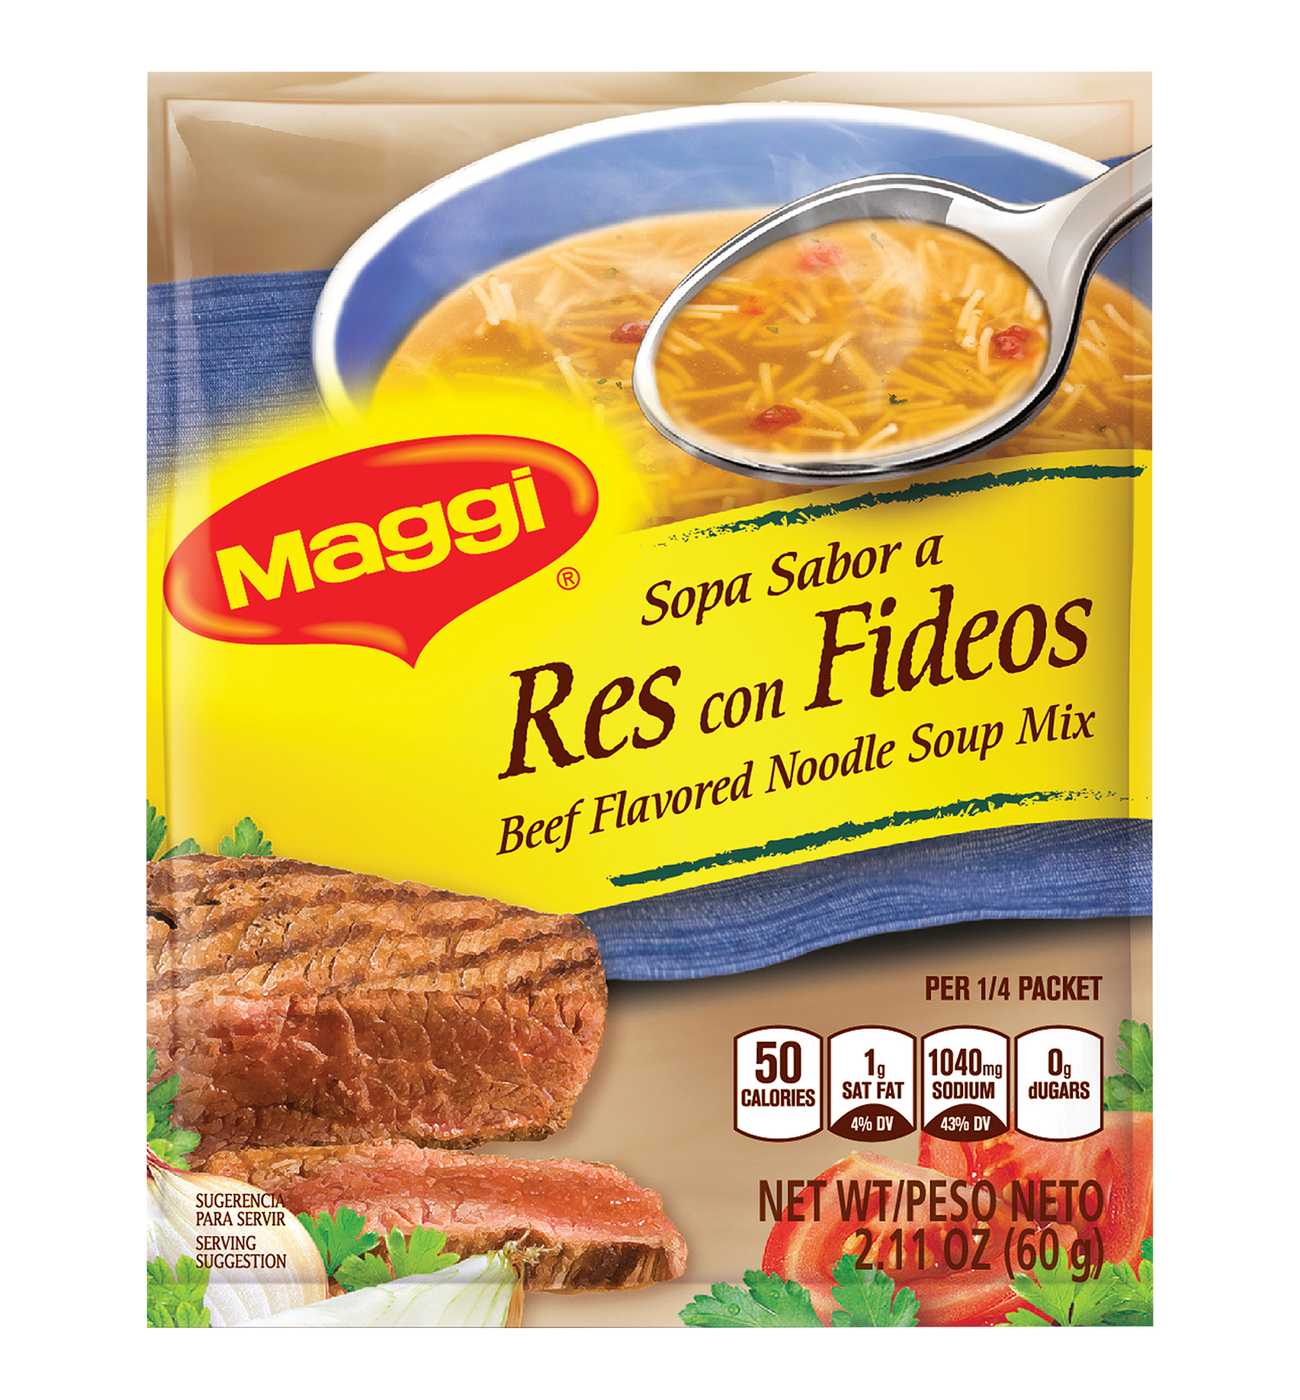 Maggi Beef Flavored Noodle Soup Mix; image 1 of 8